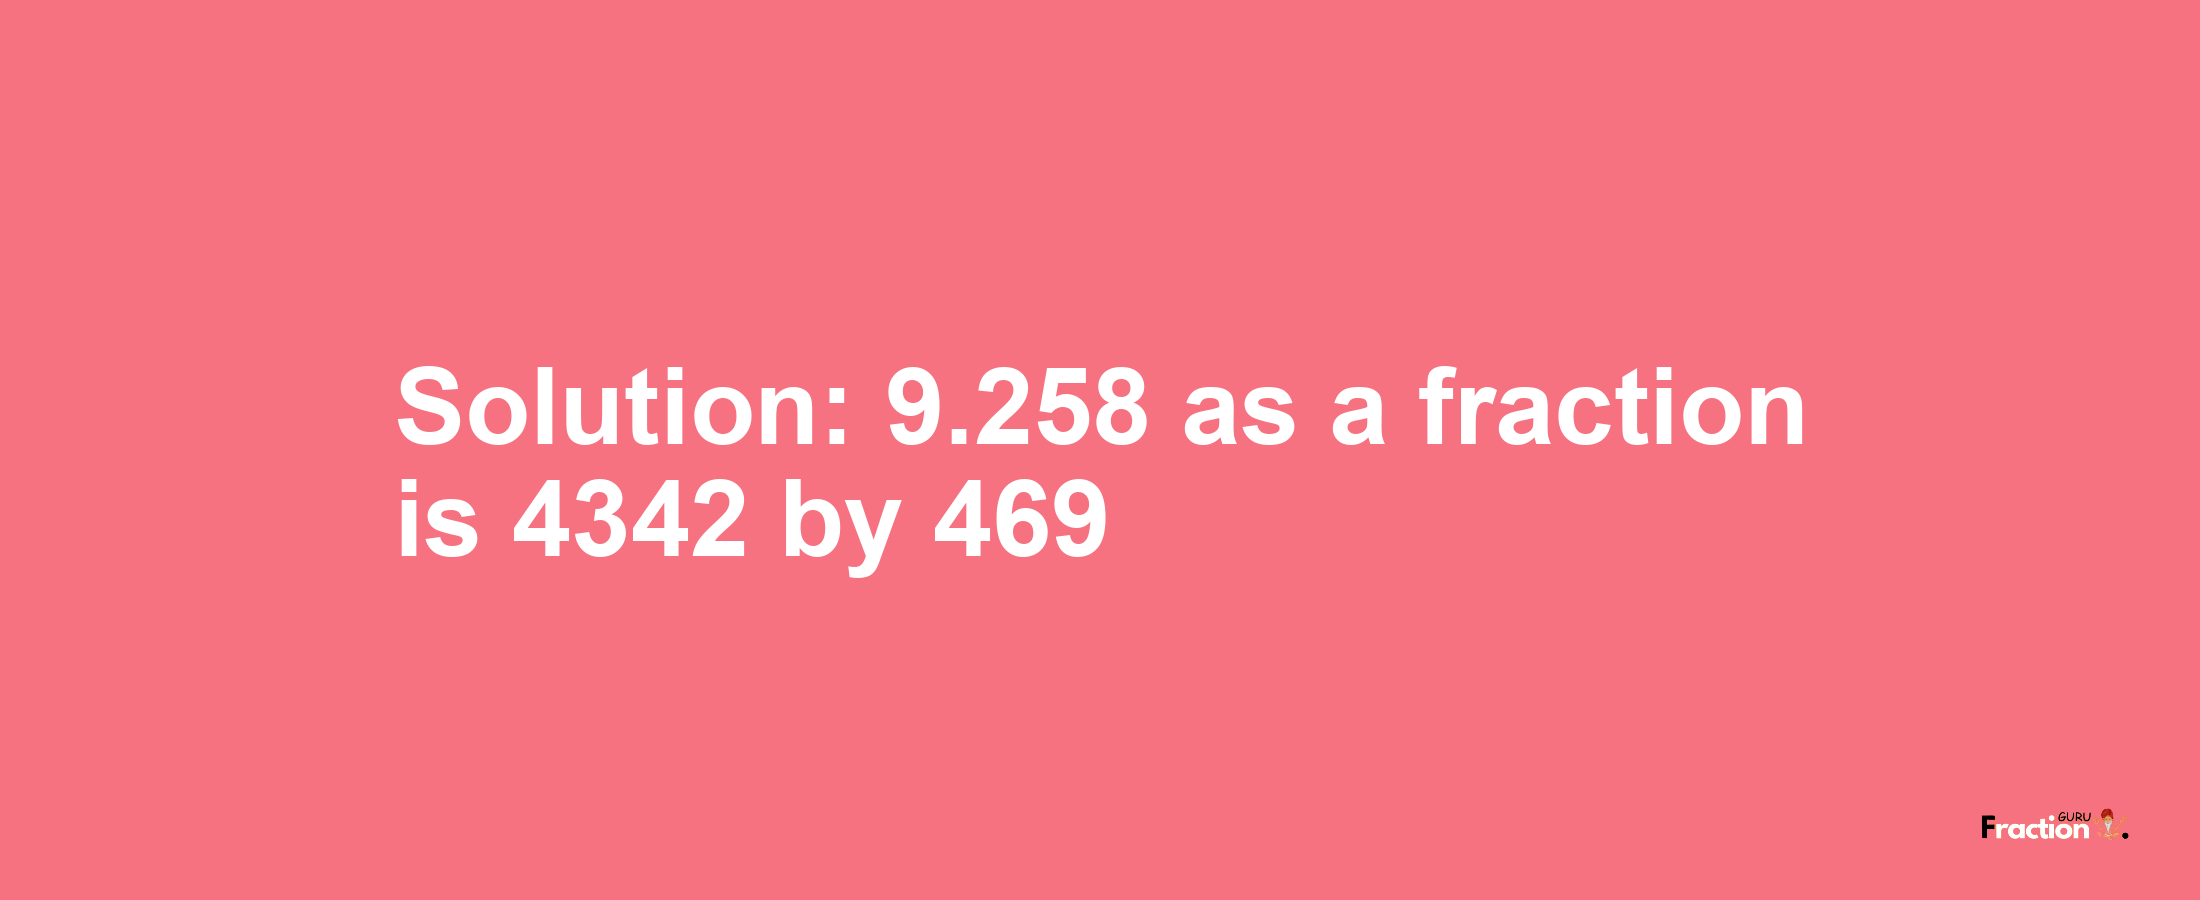 Solution:9.258 as a fraction is 4342/469